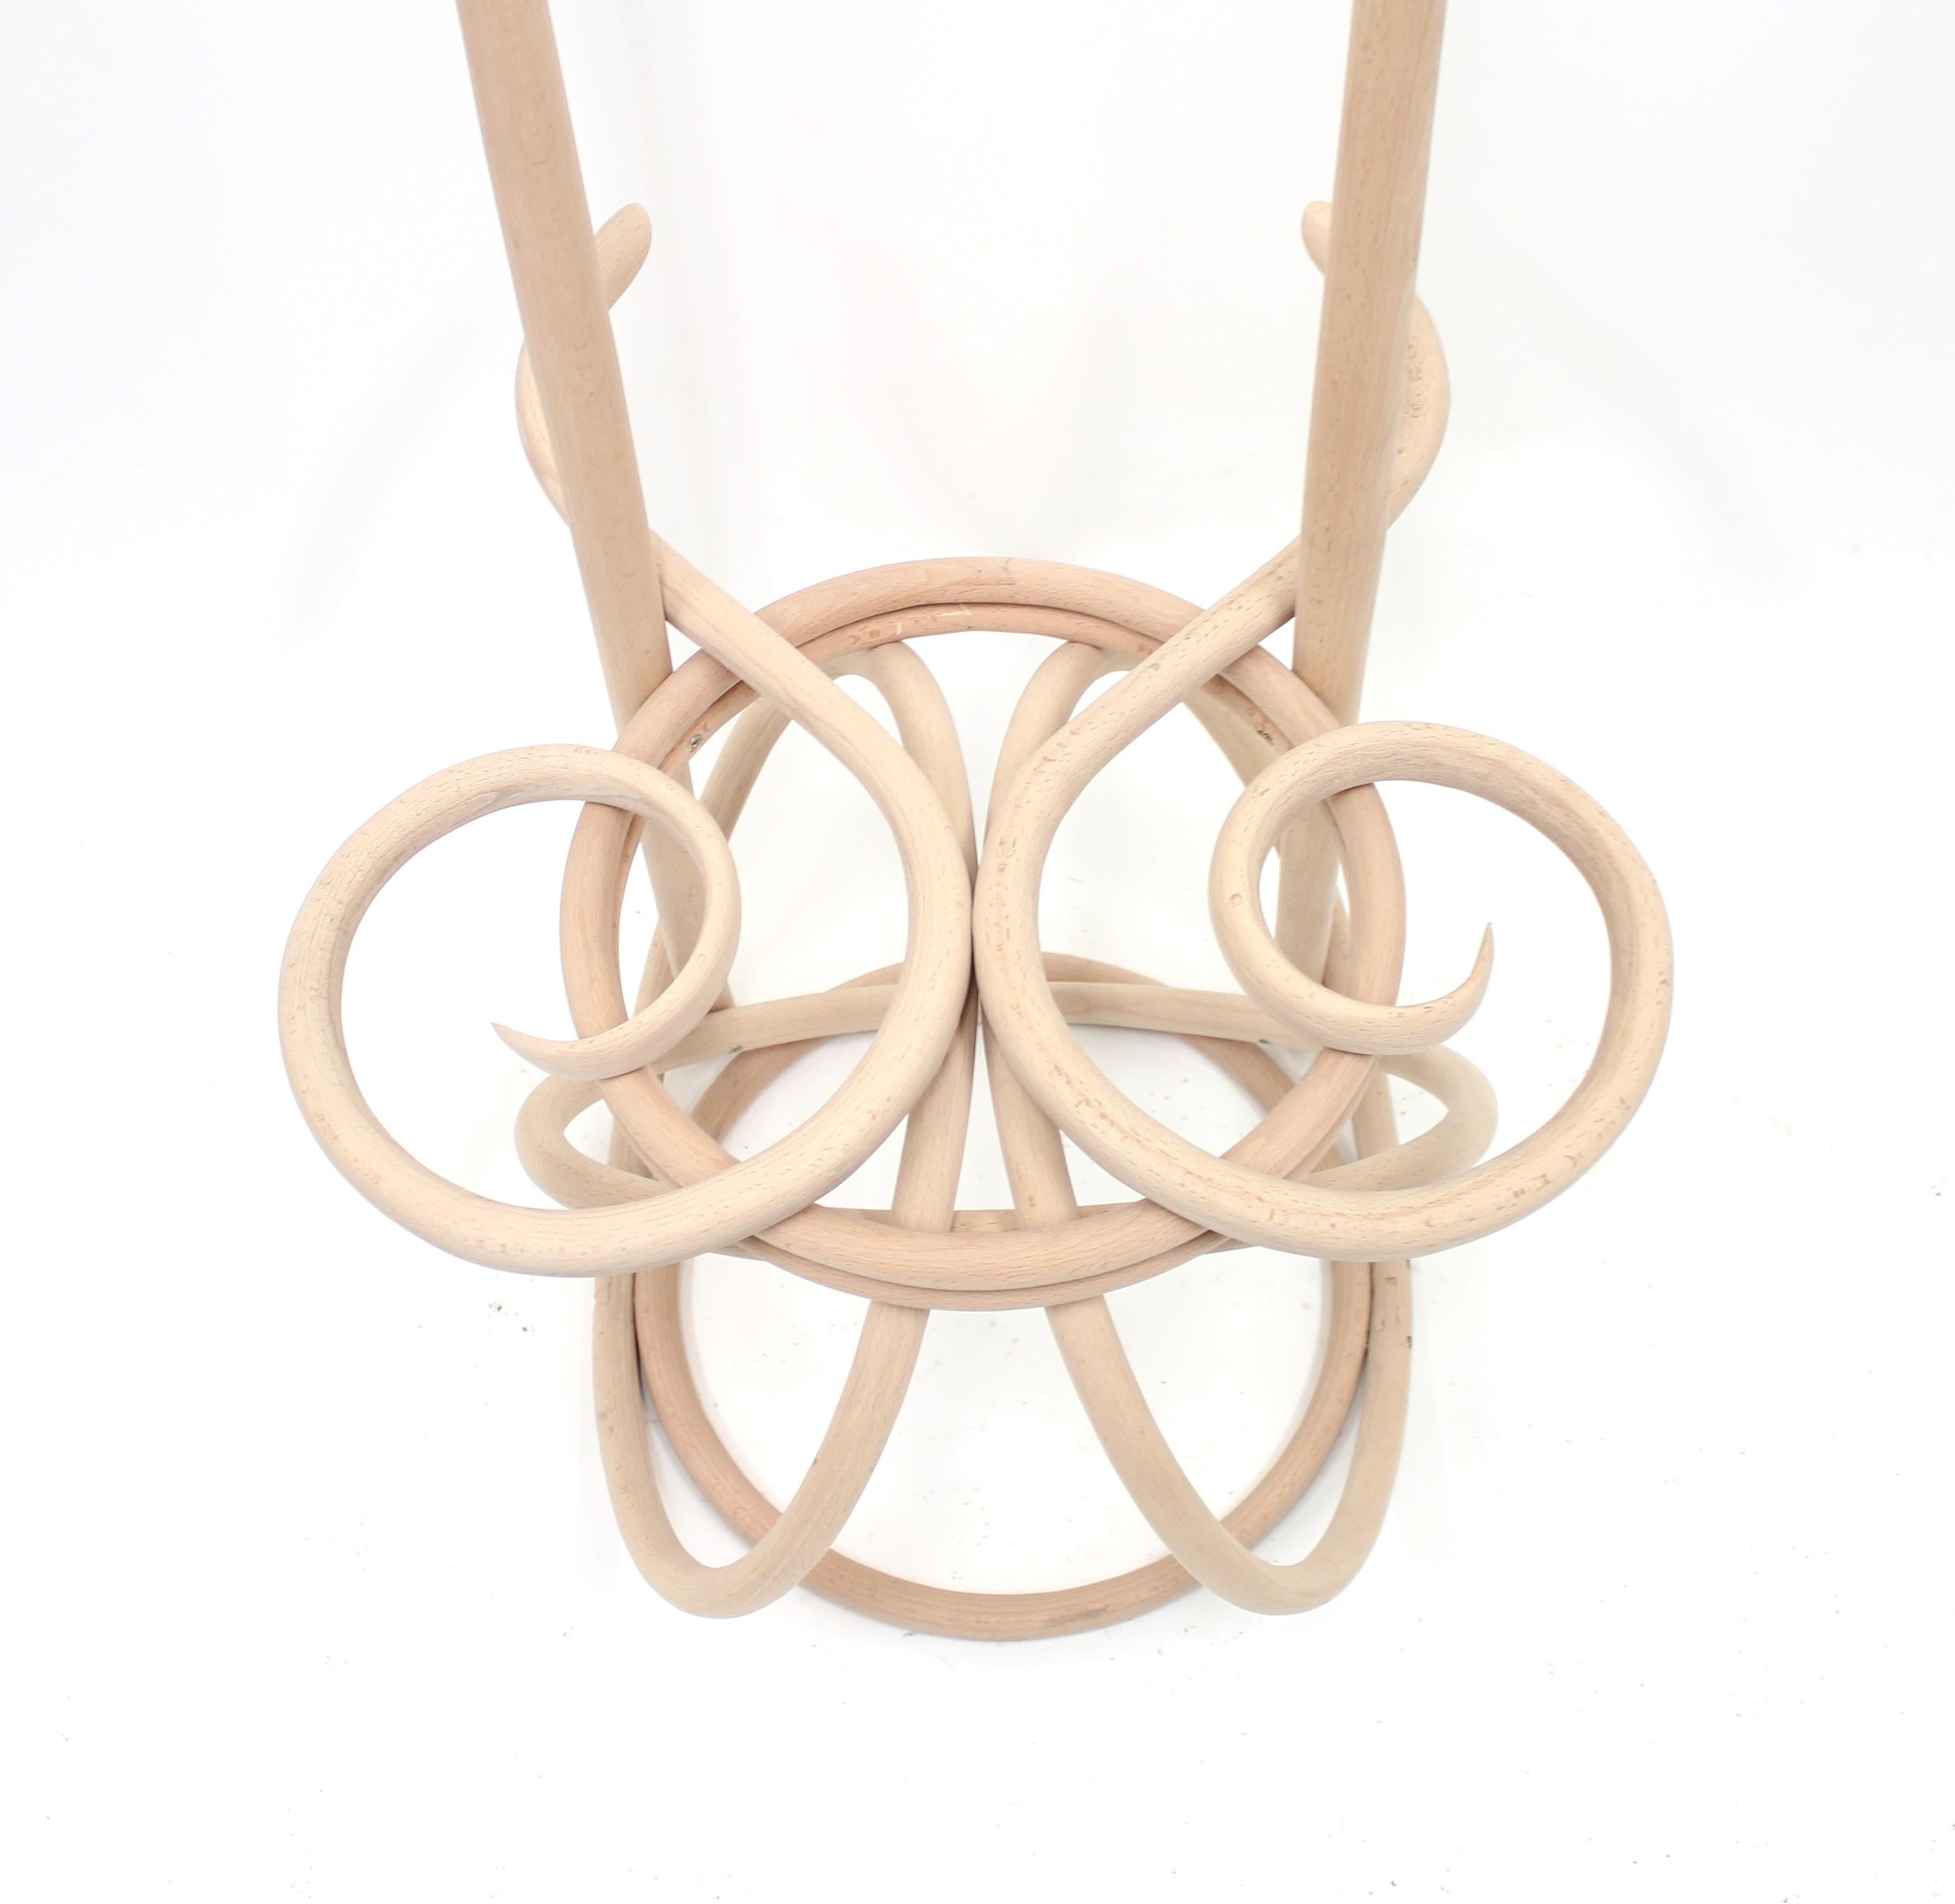 Chair of the Rings by Martino Gamper for the Conran Shop/Thonet, 2008 For Sale 4